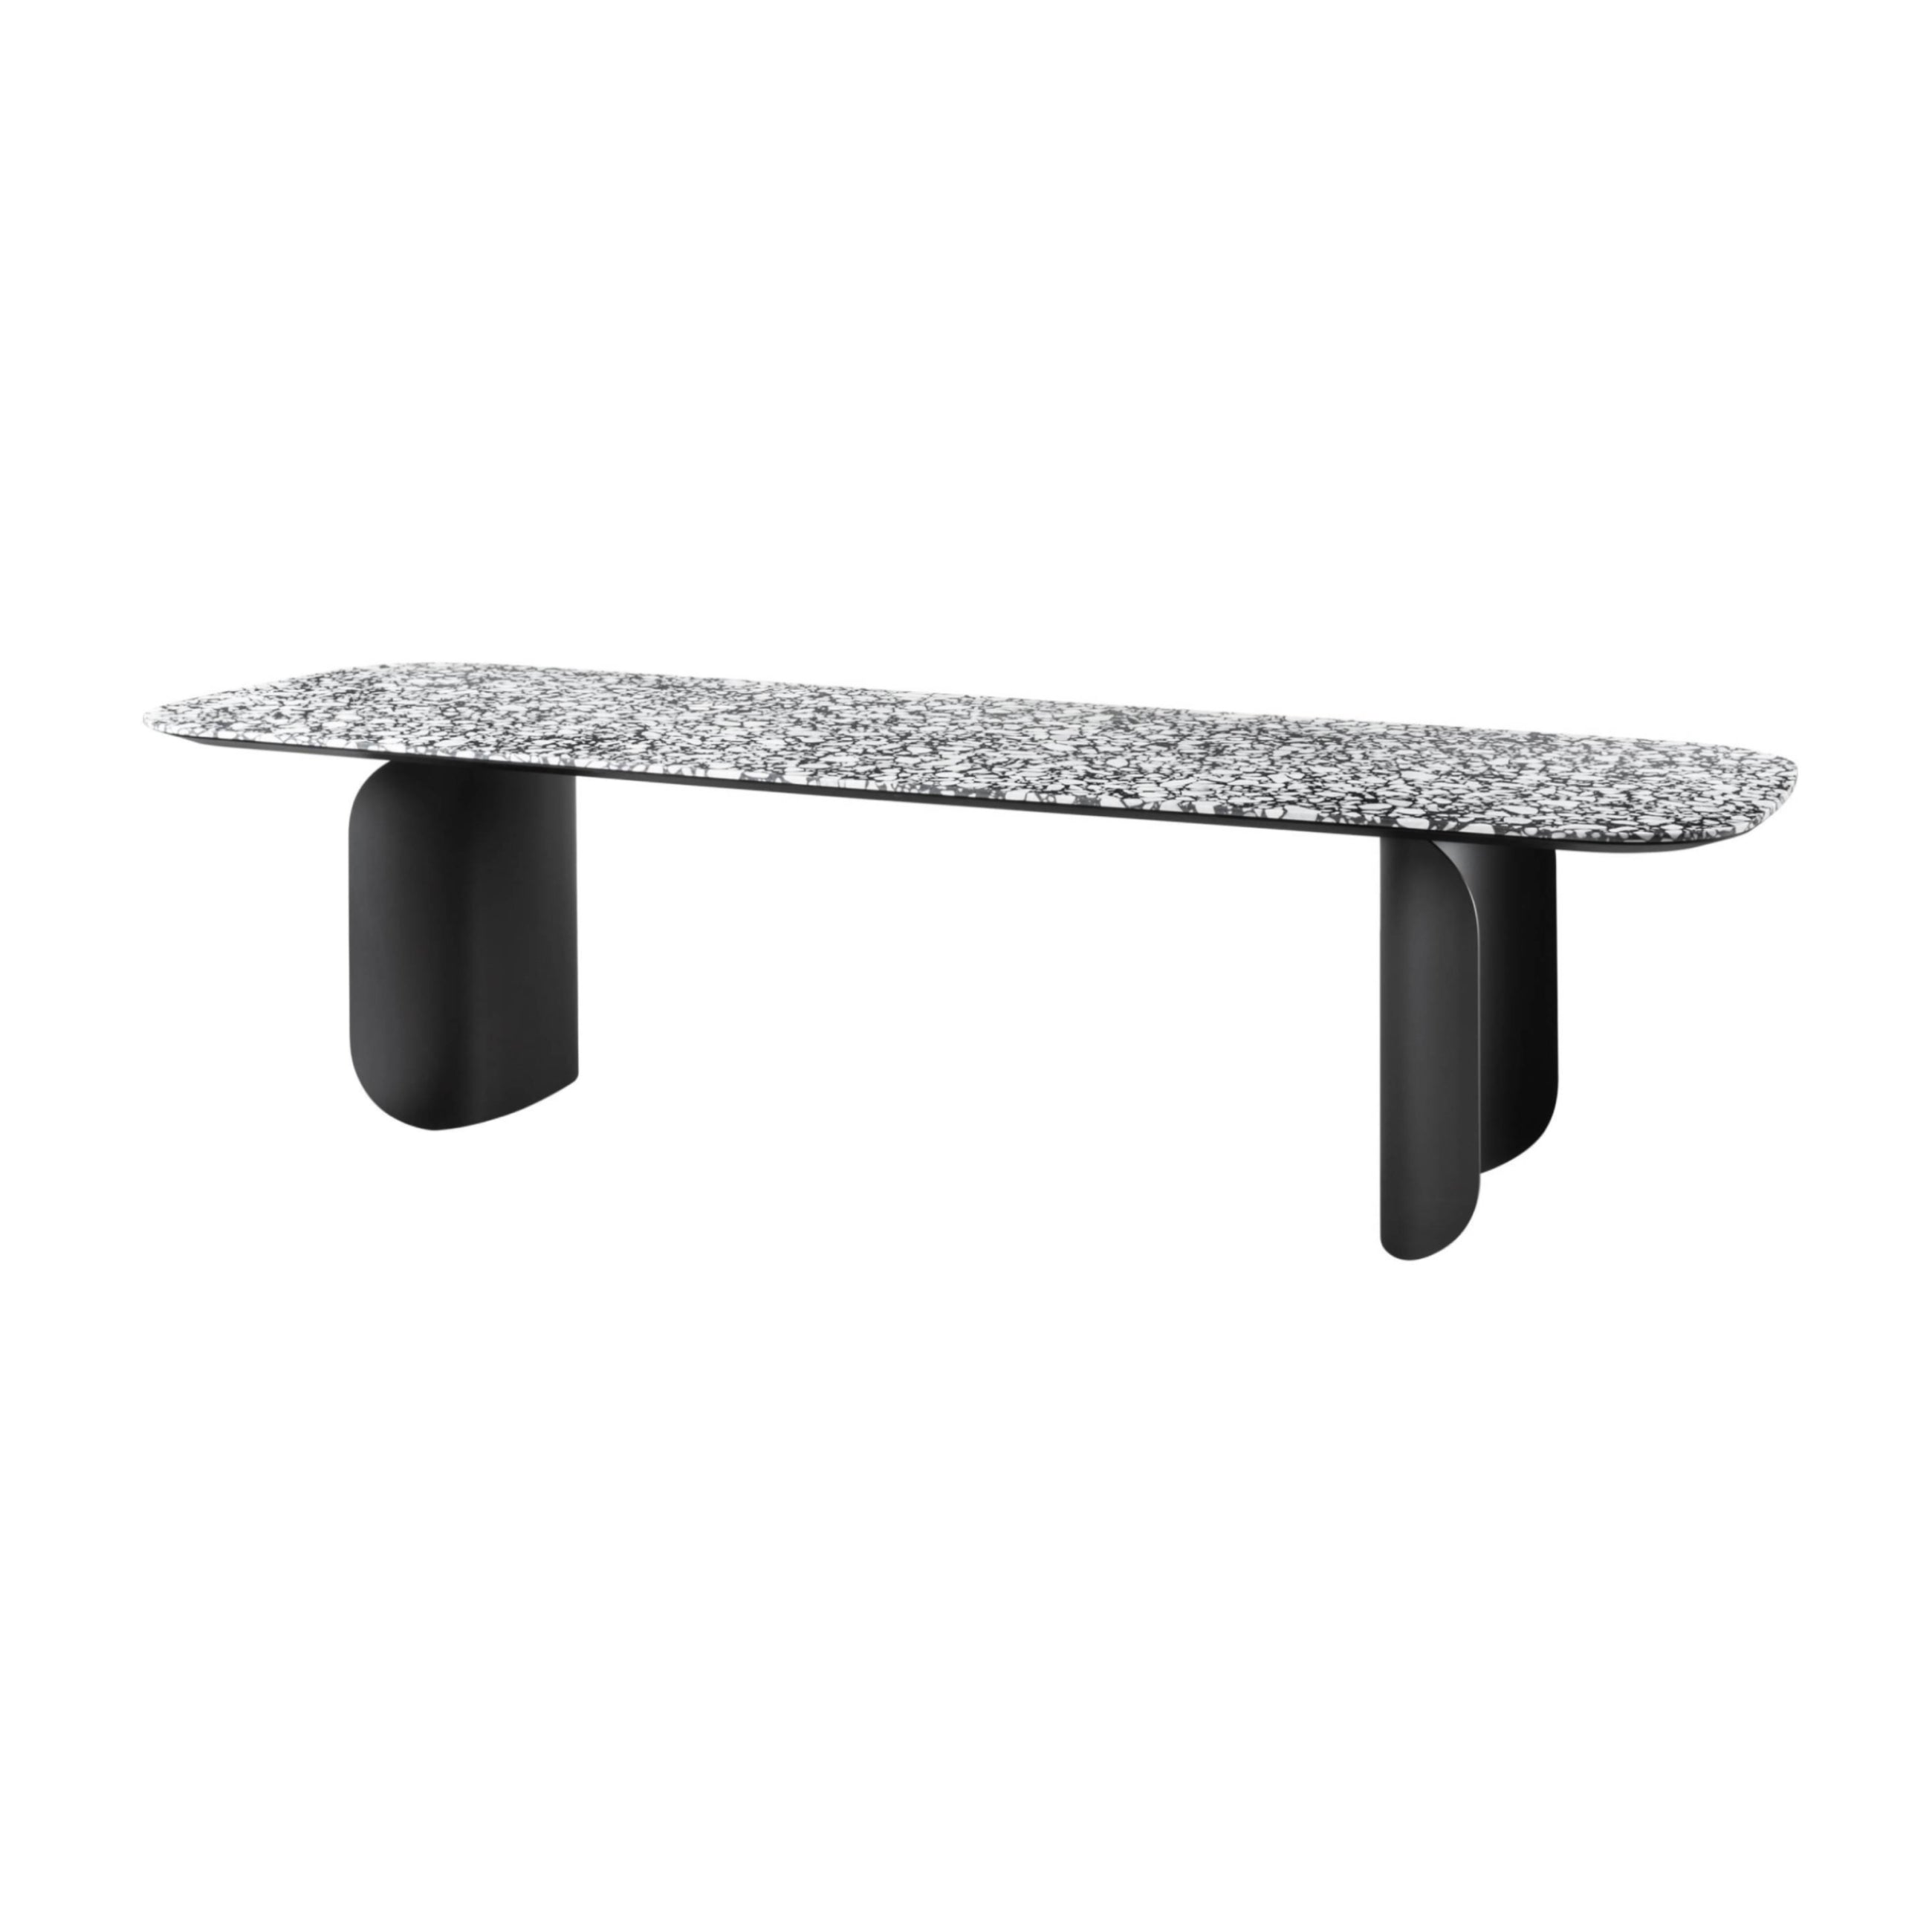 Barry Rectangular Table: Large + Palladio Moro Marble + Lacquered Black